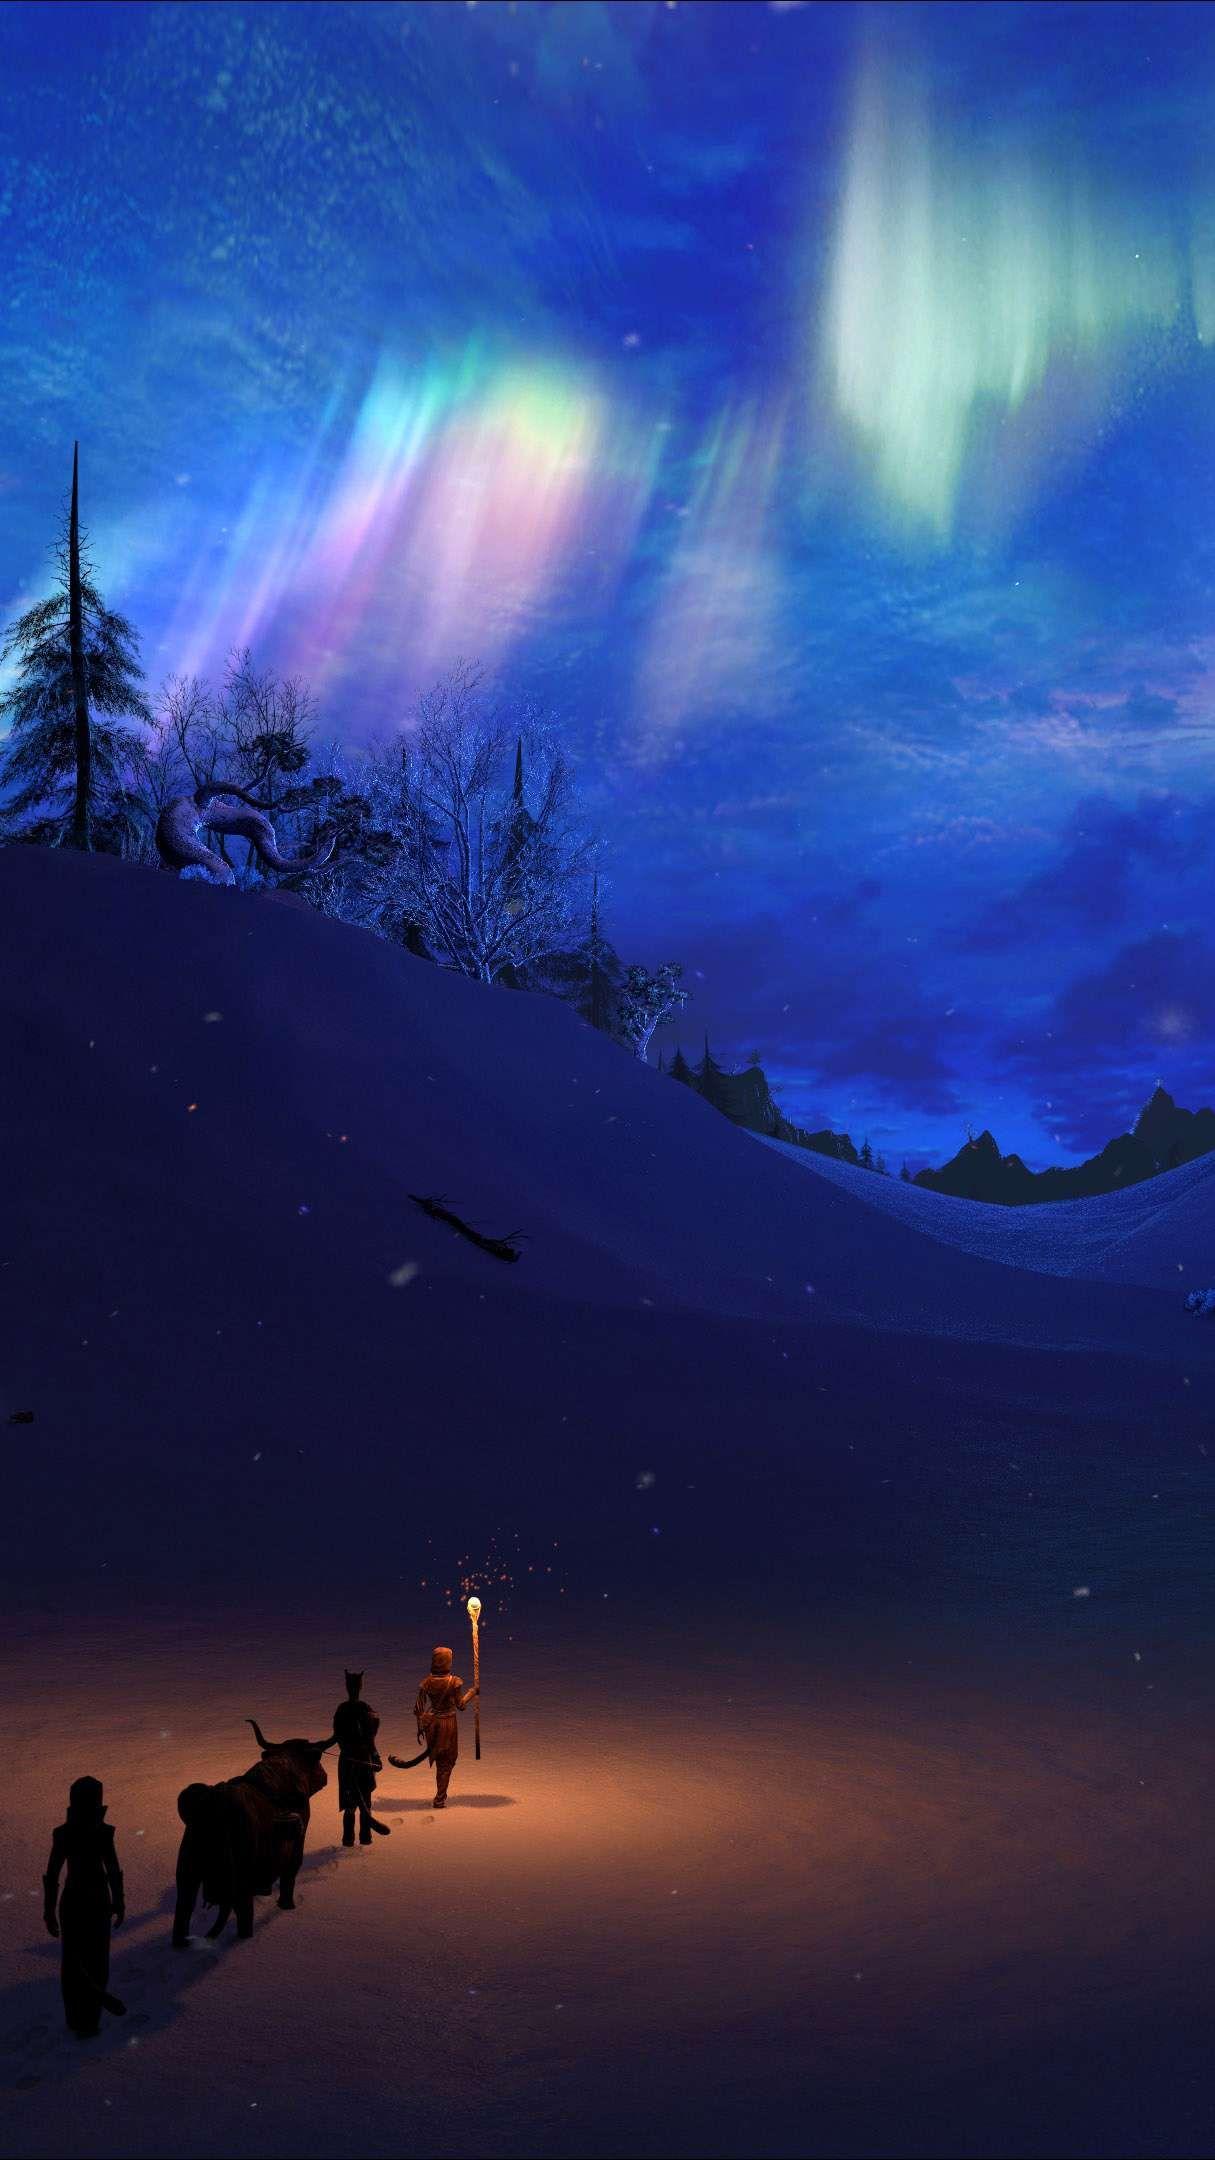 Winter Night North Pole Sky iPhone Wallpaper in 2019